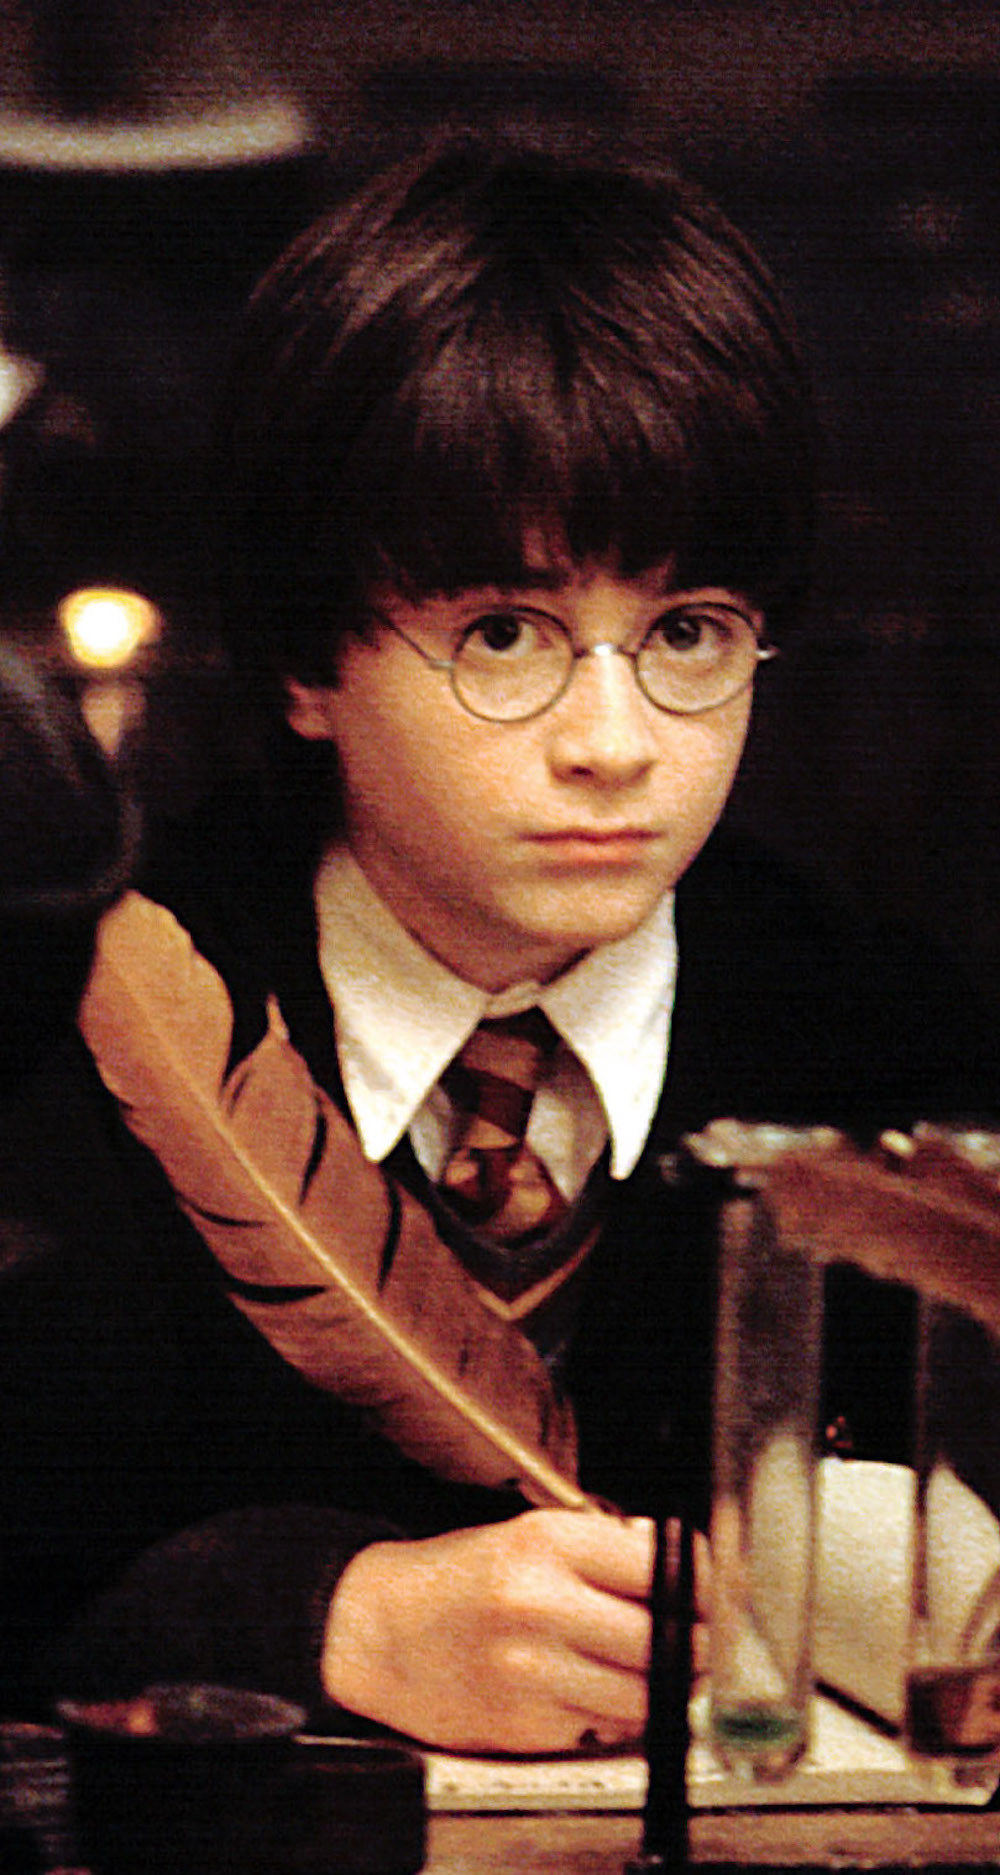 Daniel Radcliffe wearing round glasses while in a Hogwarts school uniform, writing